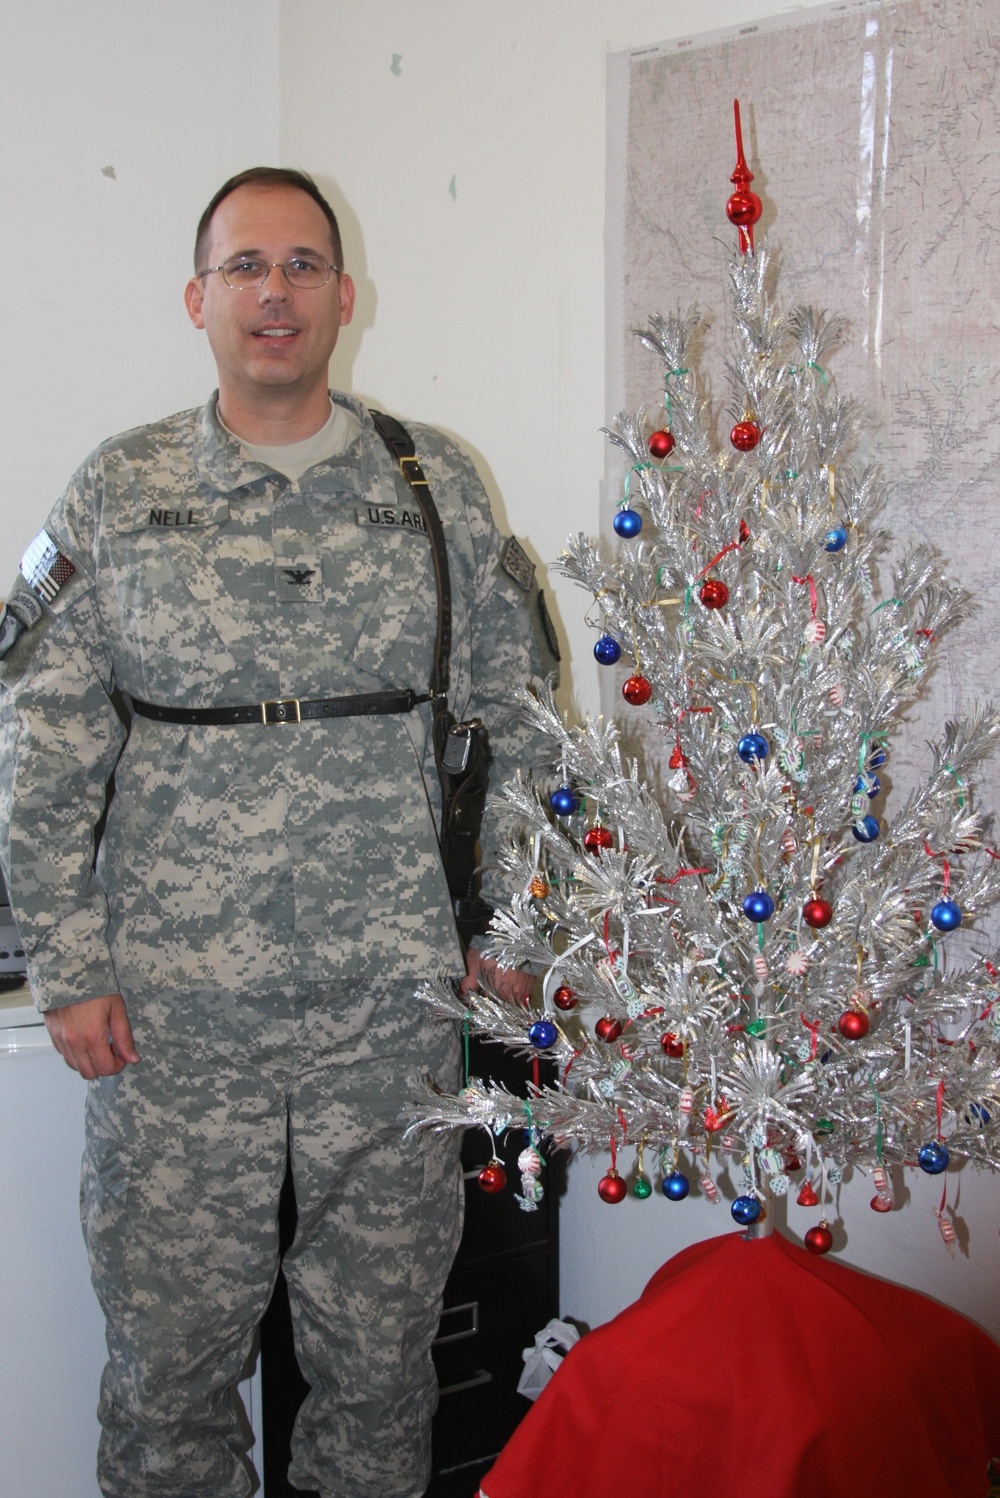 Holiday heirloom comes to Afghanistan